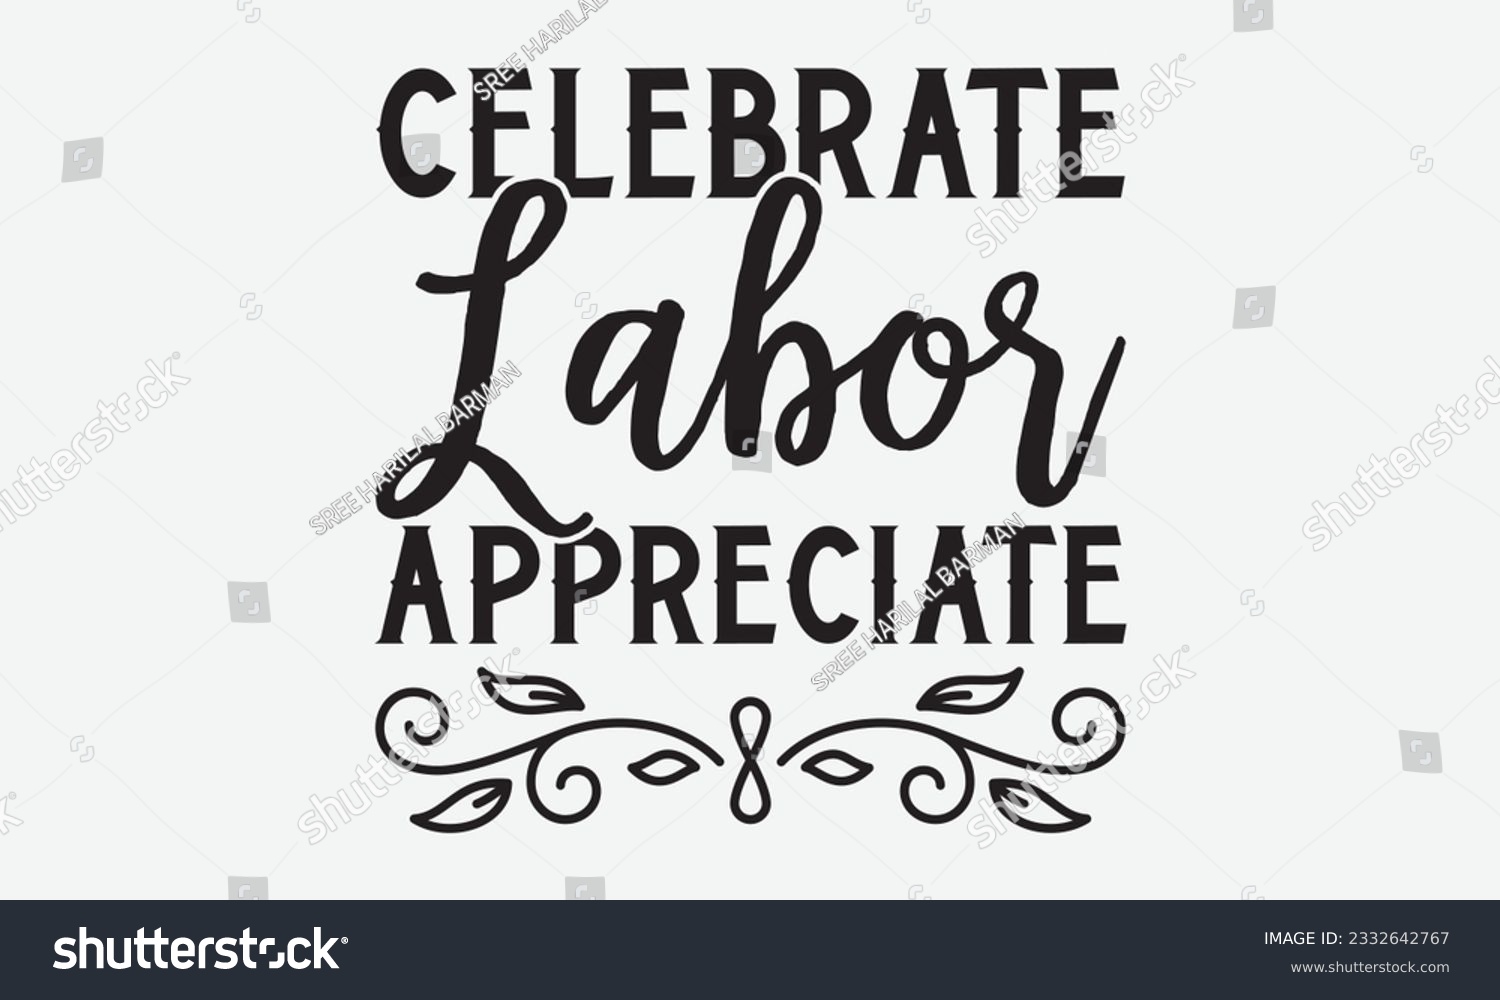 SVG of Celebrate Labor Appreciate - Labor svg typography t-shirt design. celebration in calligraphy text or font Labor in the Middle East. Greeting cards, templates, and mugs. EPS 10. svg